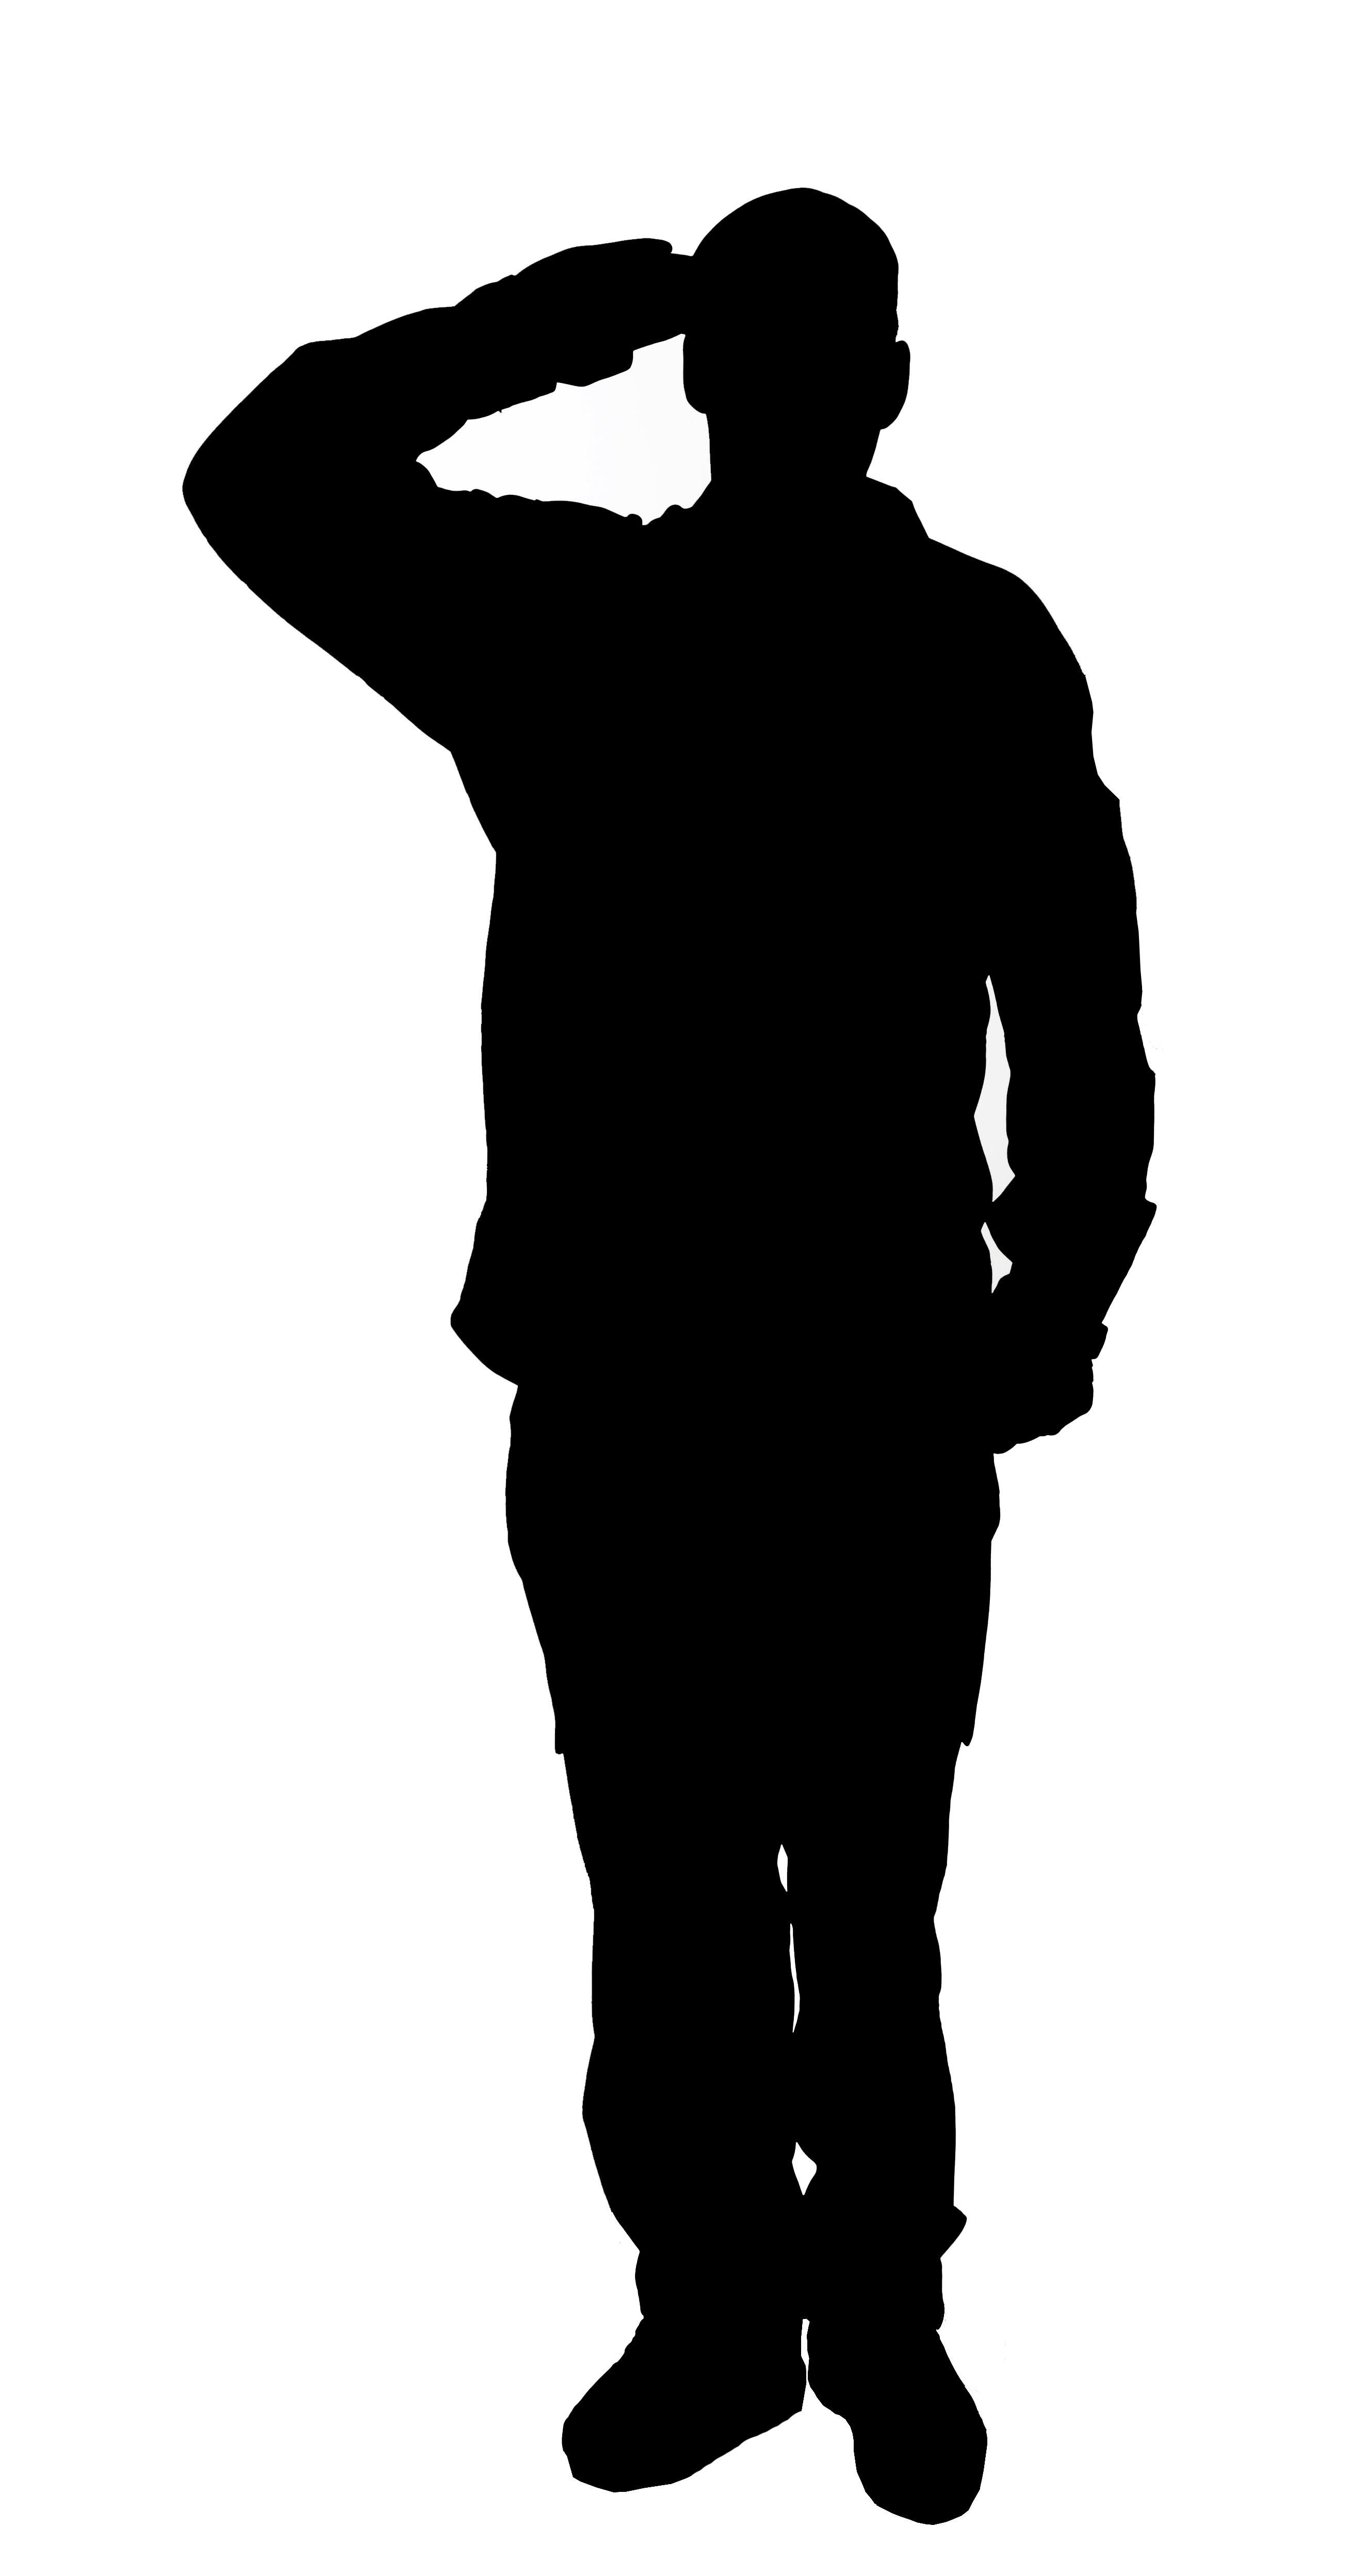 13 Soldier Silhouette Free Cliparts That You Can Download To You